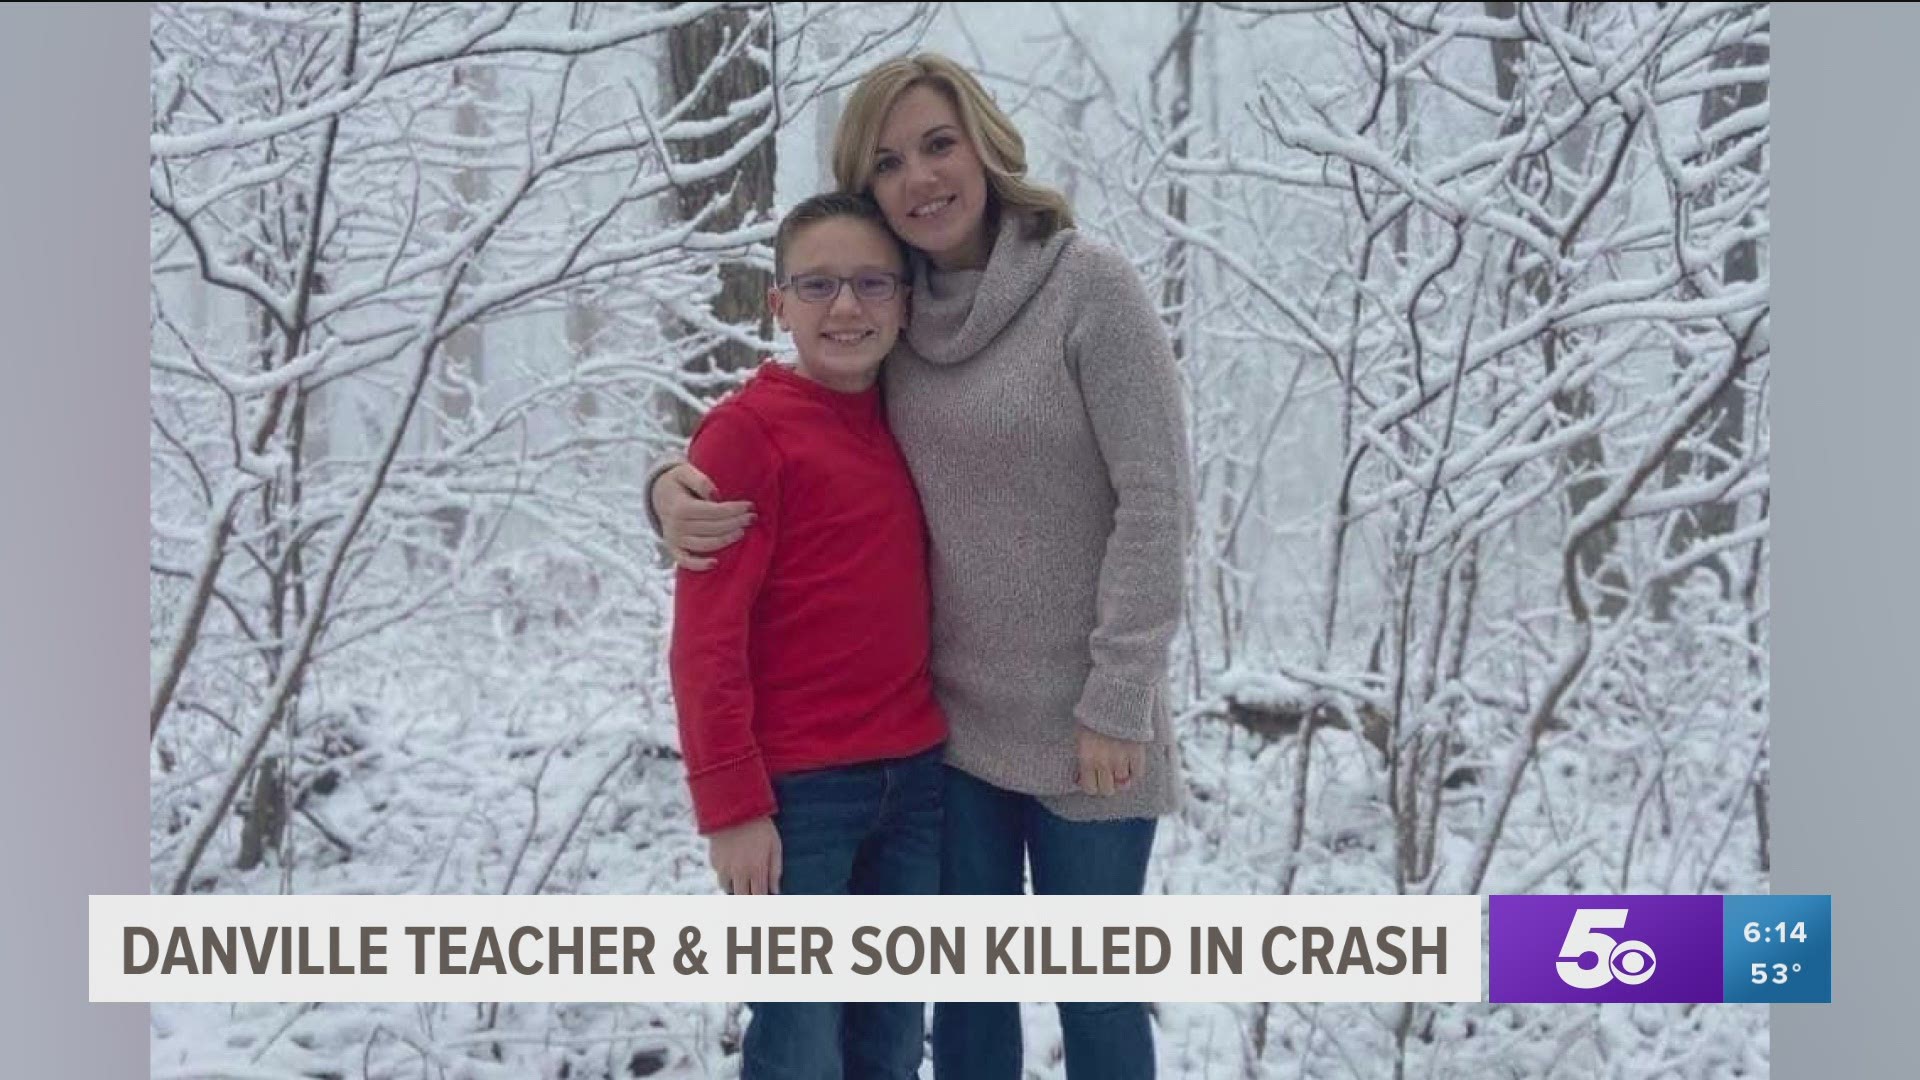 A Danville school teacher and her son were killed in a car crash Monday in Yell County. They were also the wife and son of a Danville pastor.